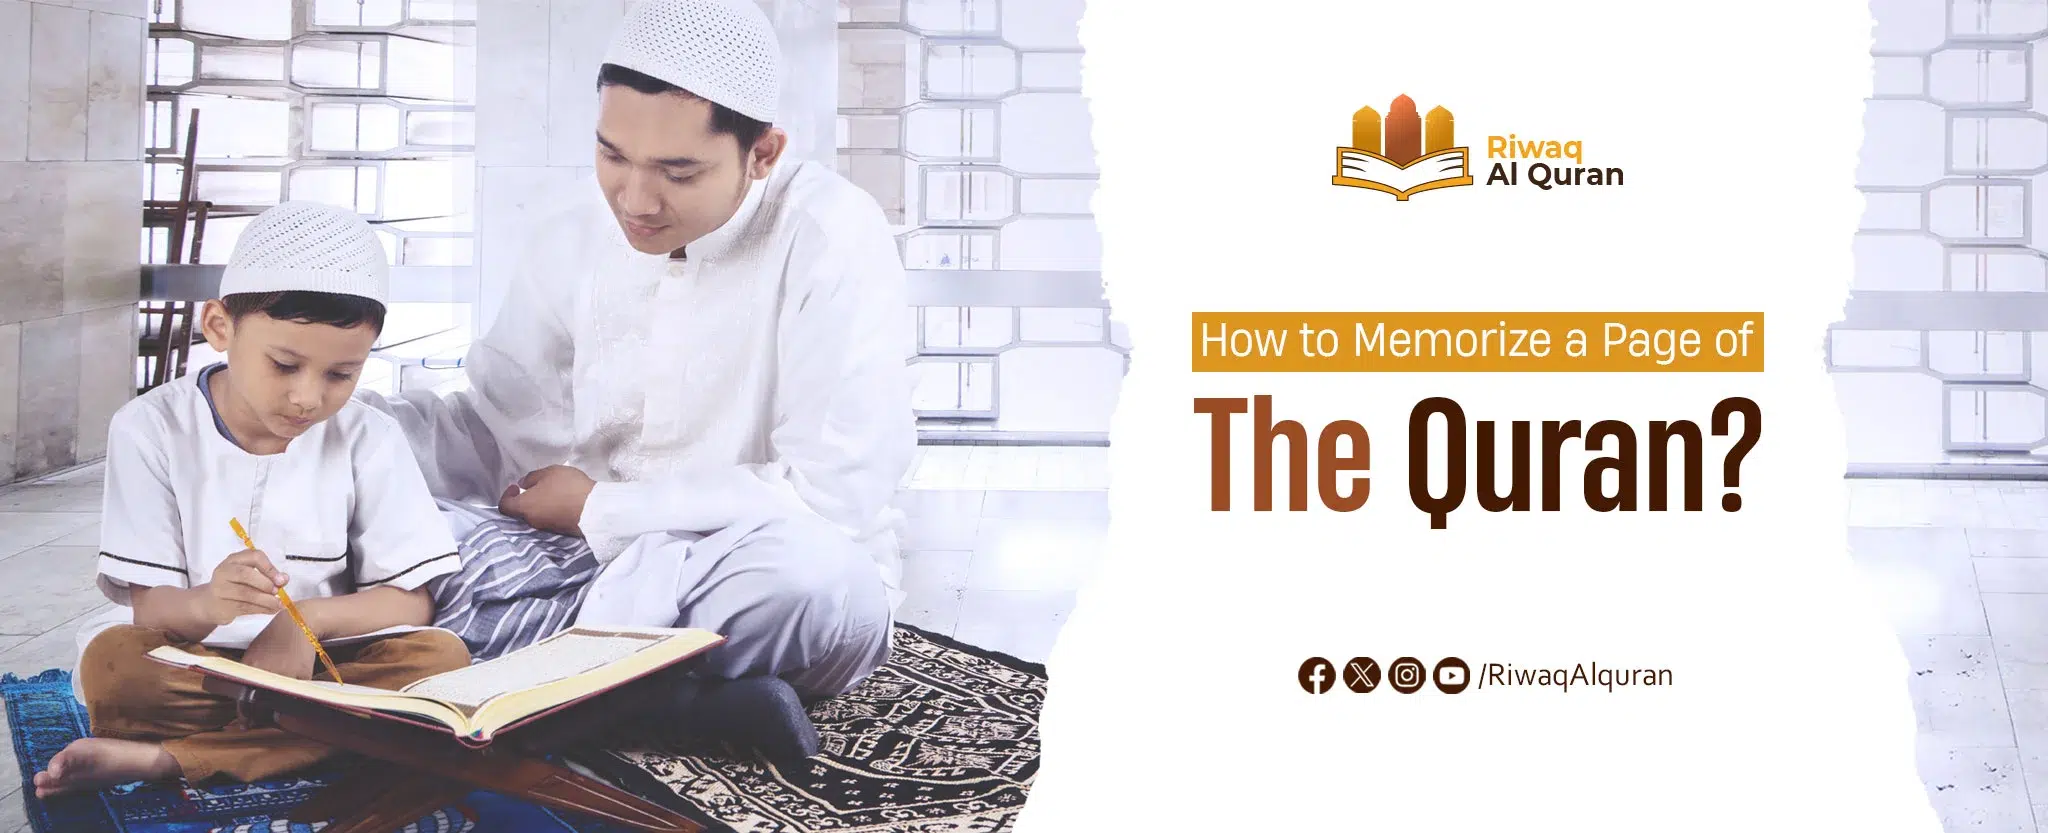 How To Memorize A Page Of The Quran?